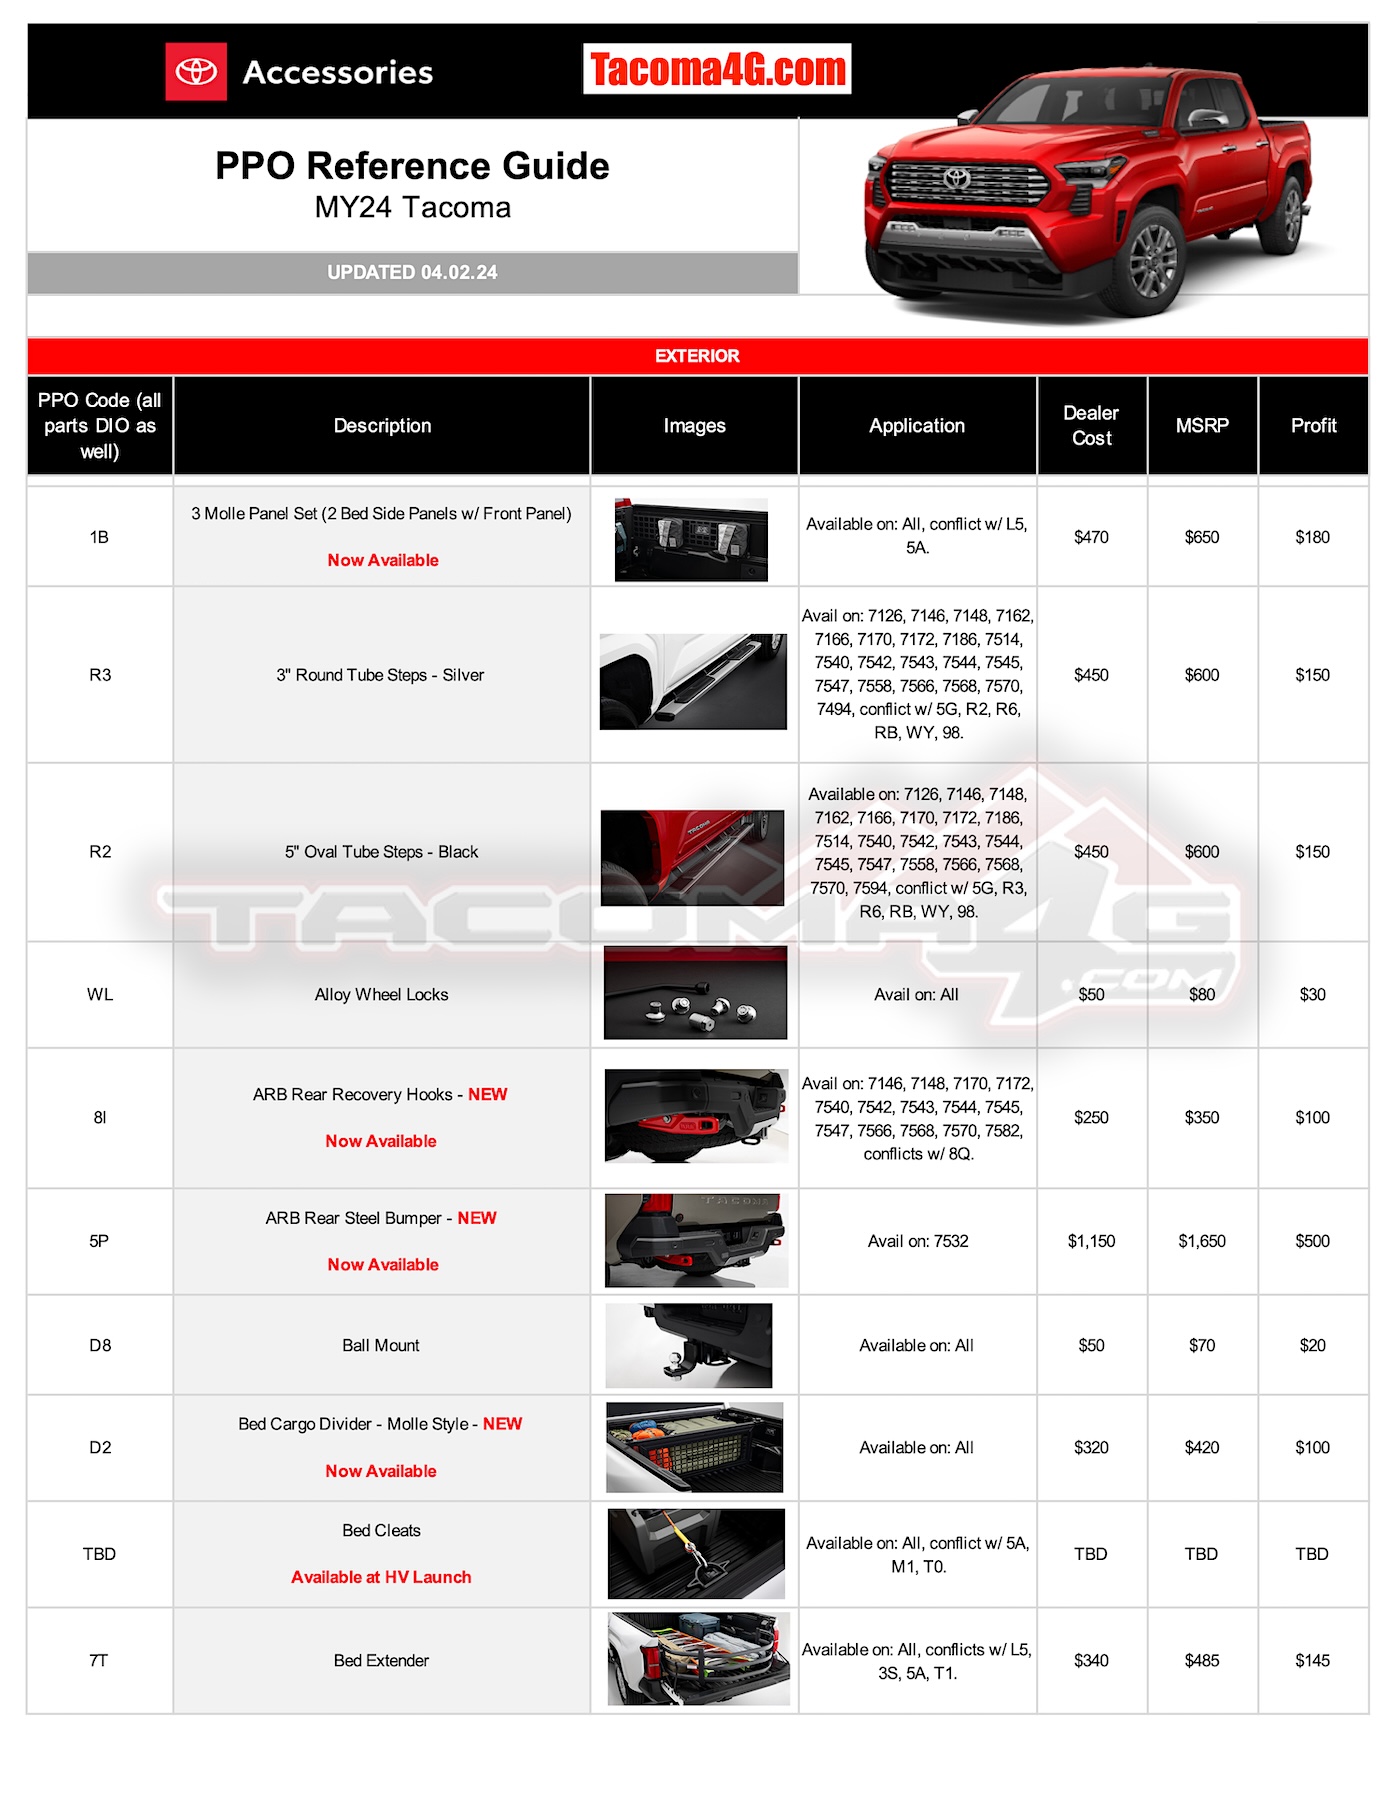 2024 Tacoma 2024 Tacoma Post-Production Options (PPO) Guide - OEM / TRD Accessories Parts + Pricing!  [UPDATED 5-7-24] MY24 Tacoma PPO Guide_04_02_24-1